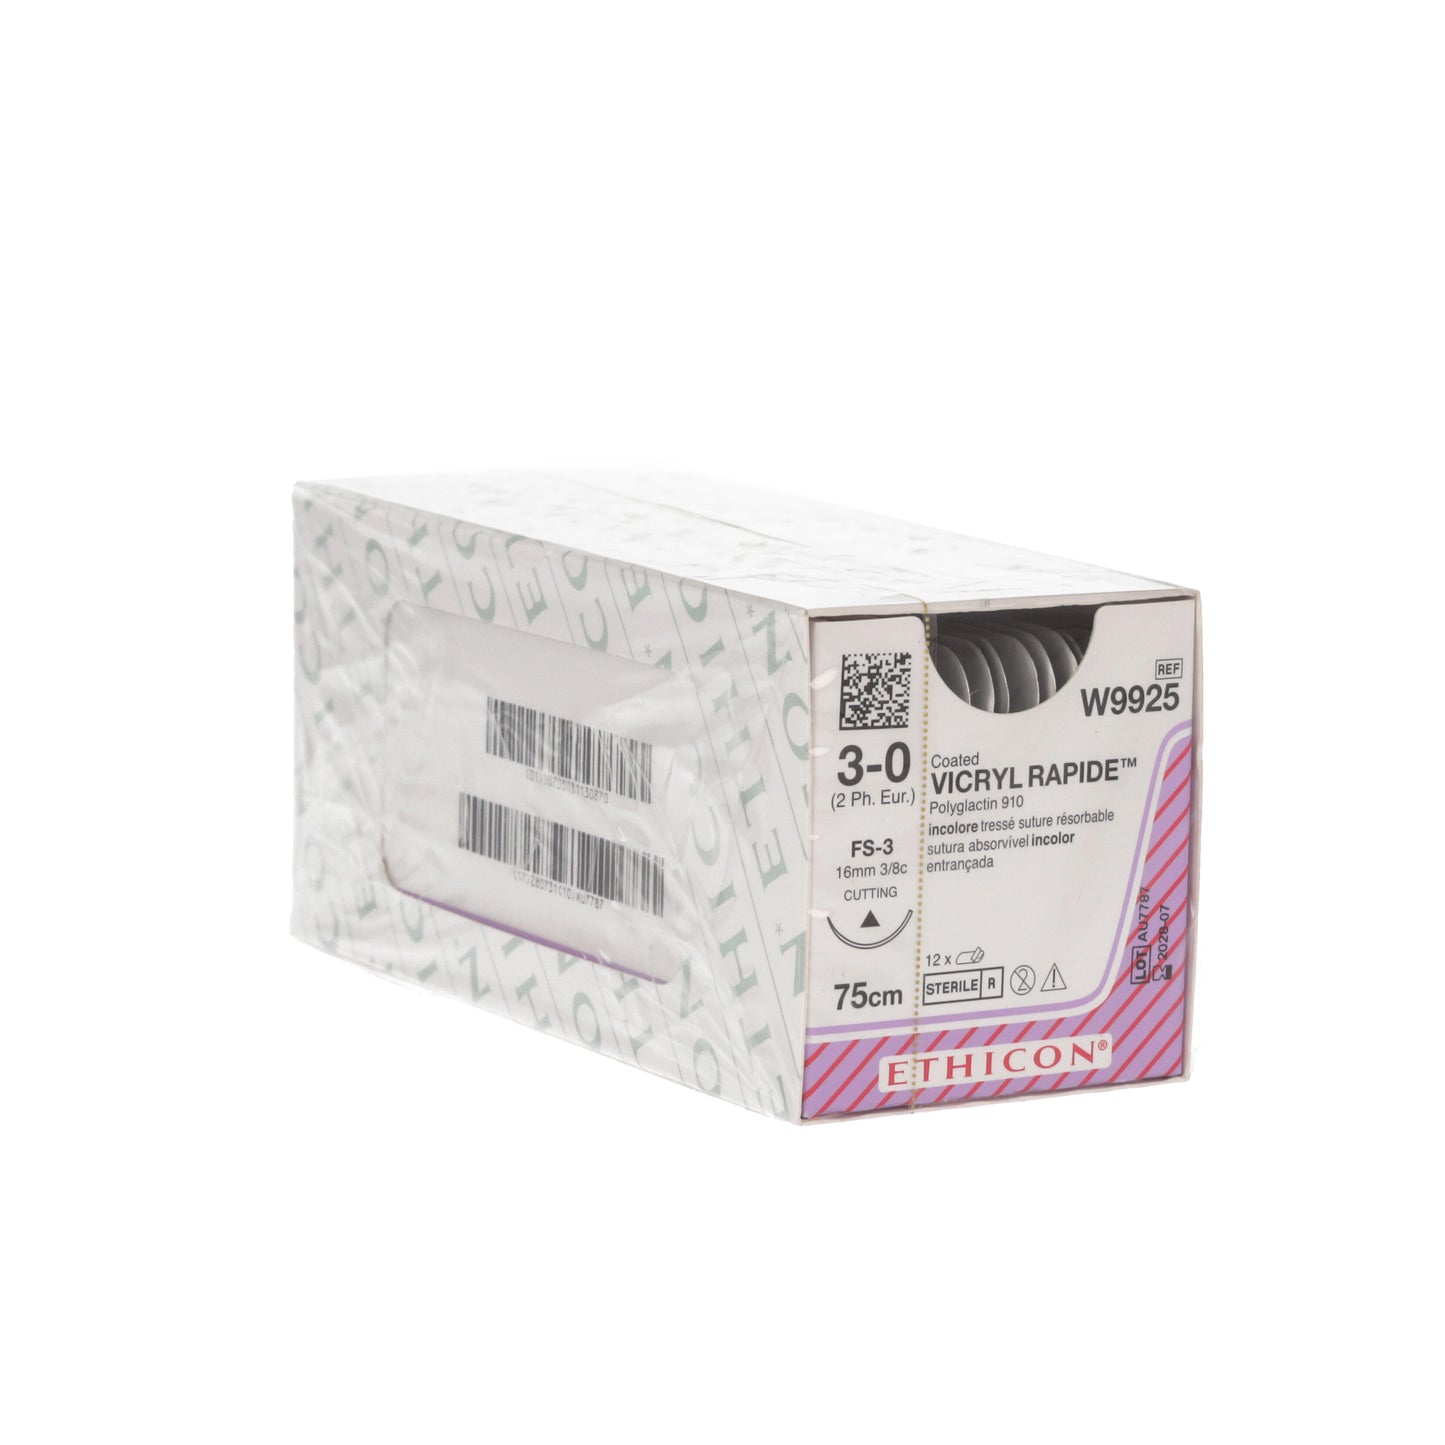 Coated VICRYL rapide Suture: 16mm 75cm undyed 3-0 2 (x12)